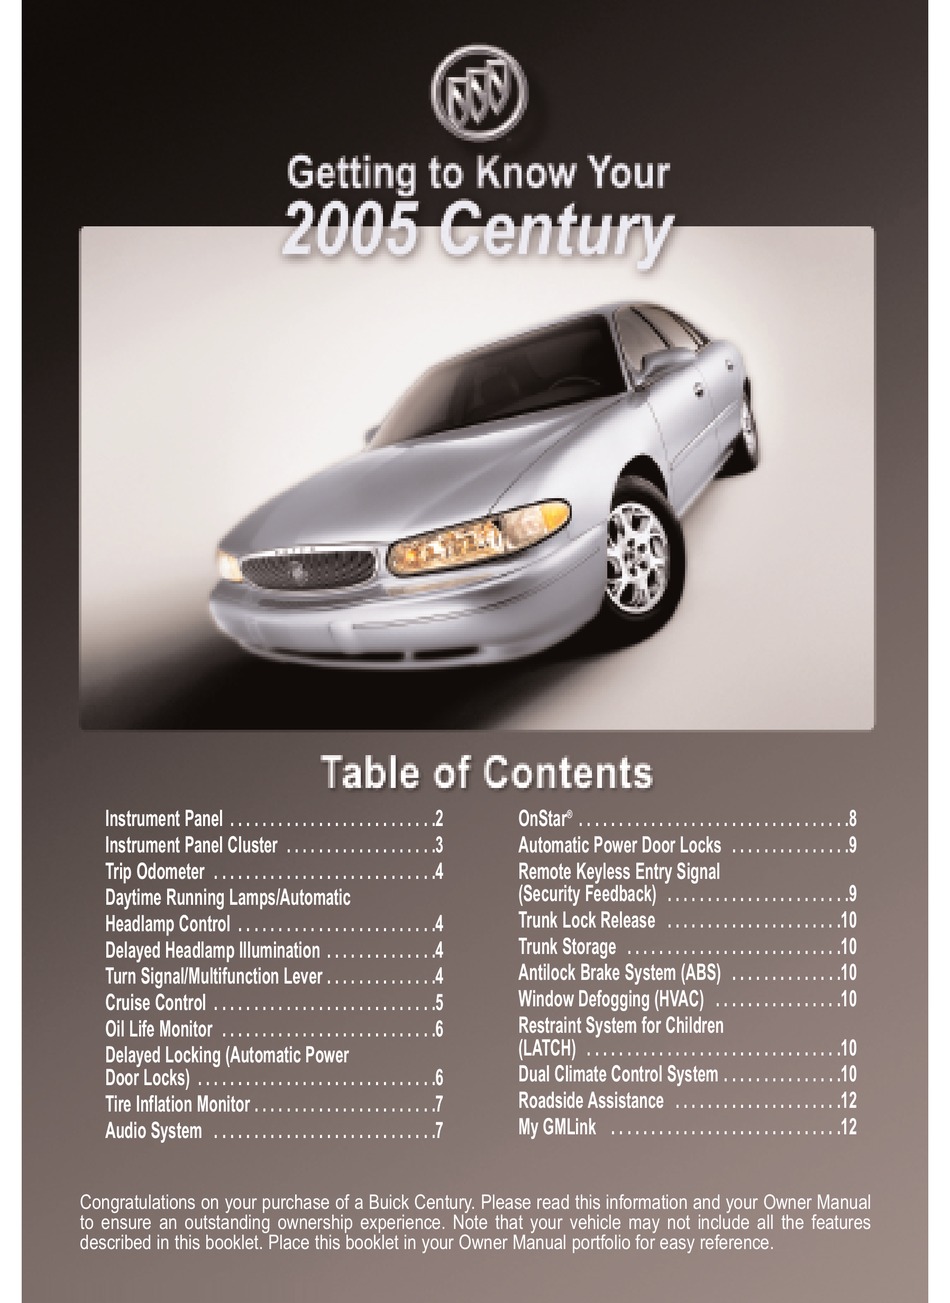 01 2001 Buick Century owners manual 